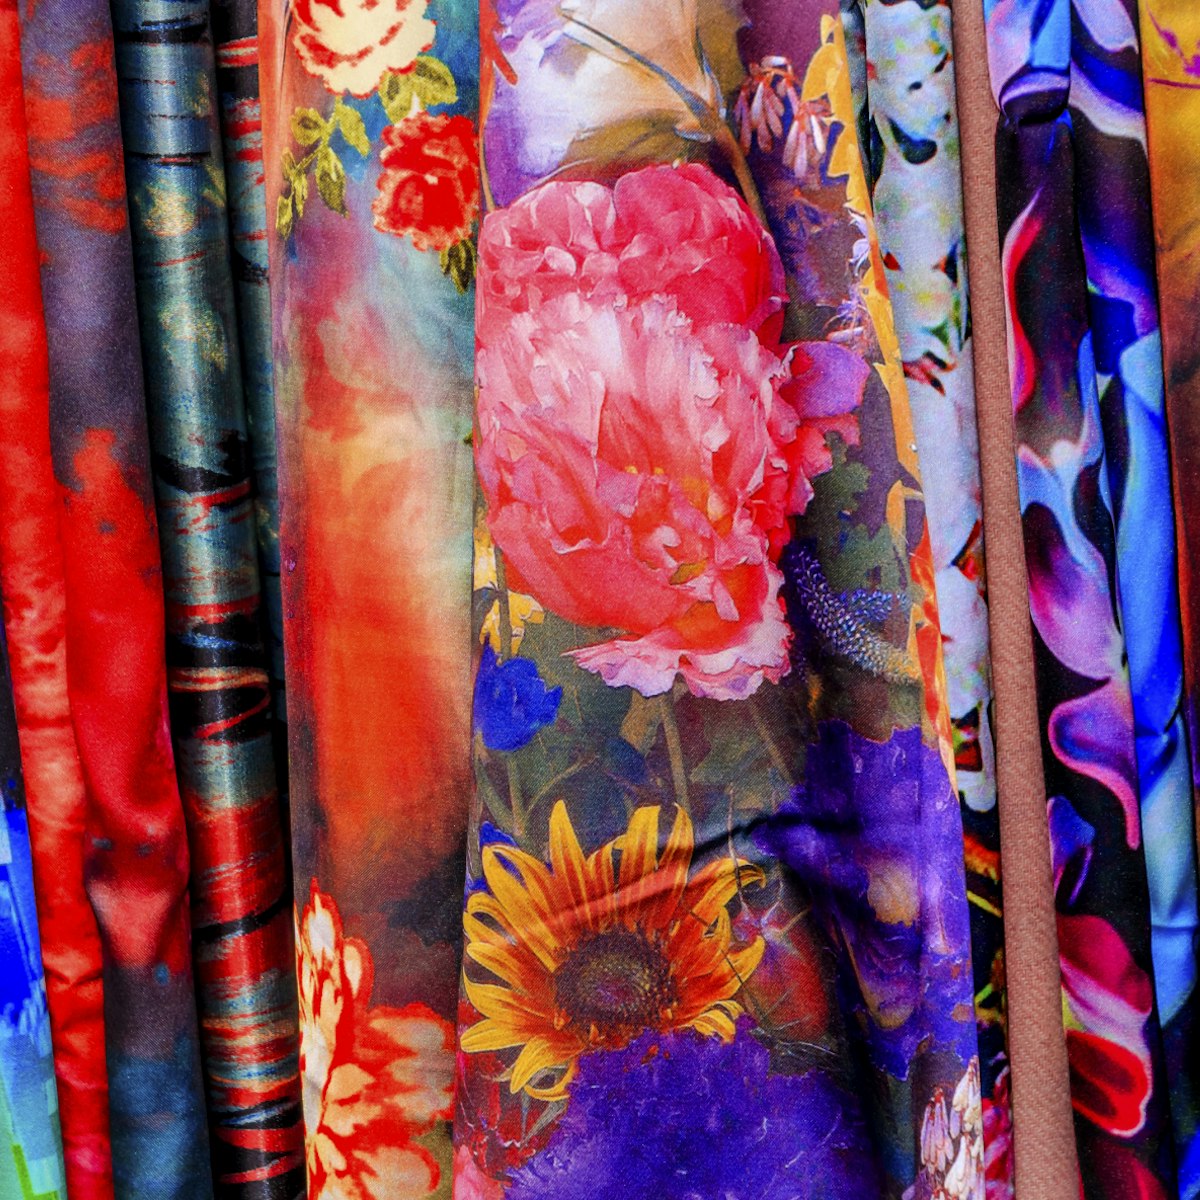 Chinese Colorful Flower Silk Scarves Yuyuan Shanghai China